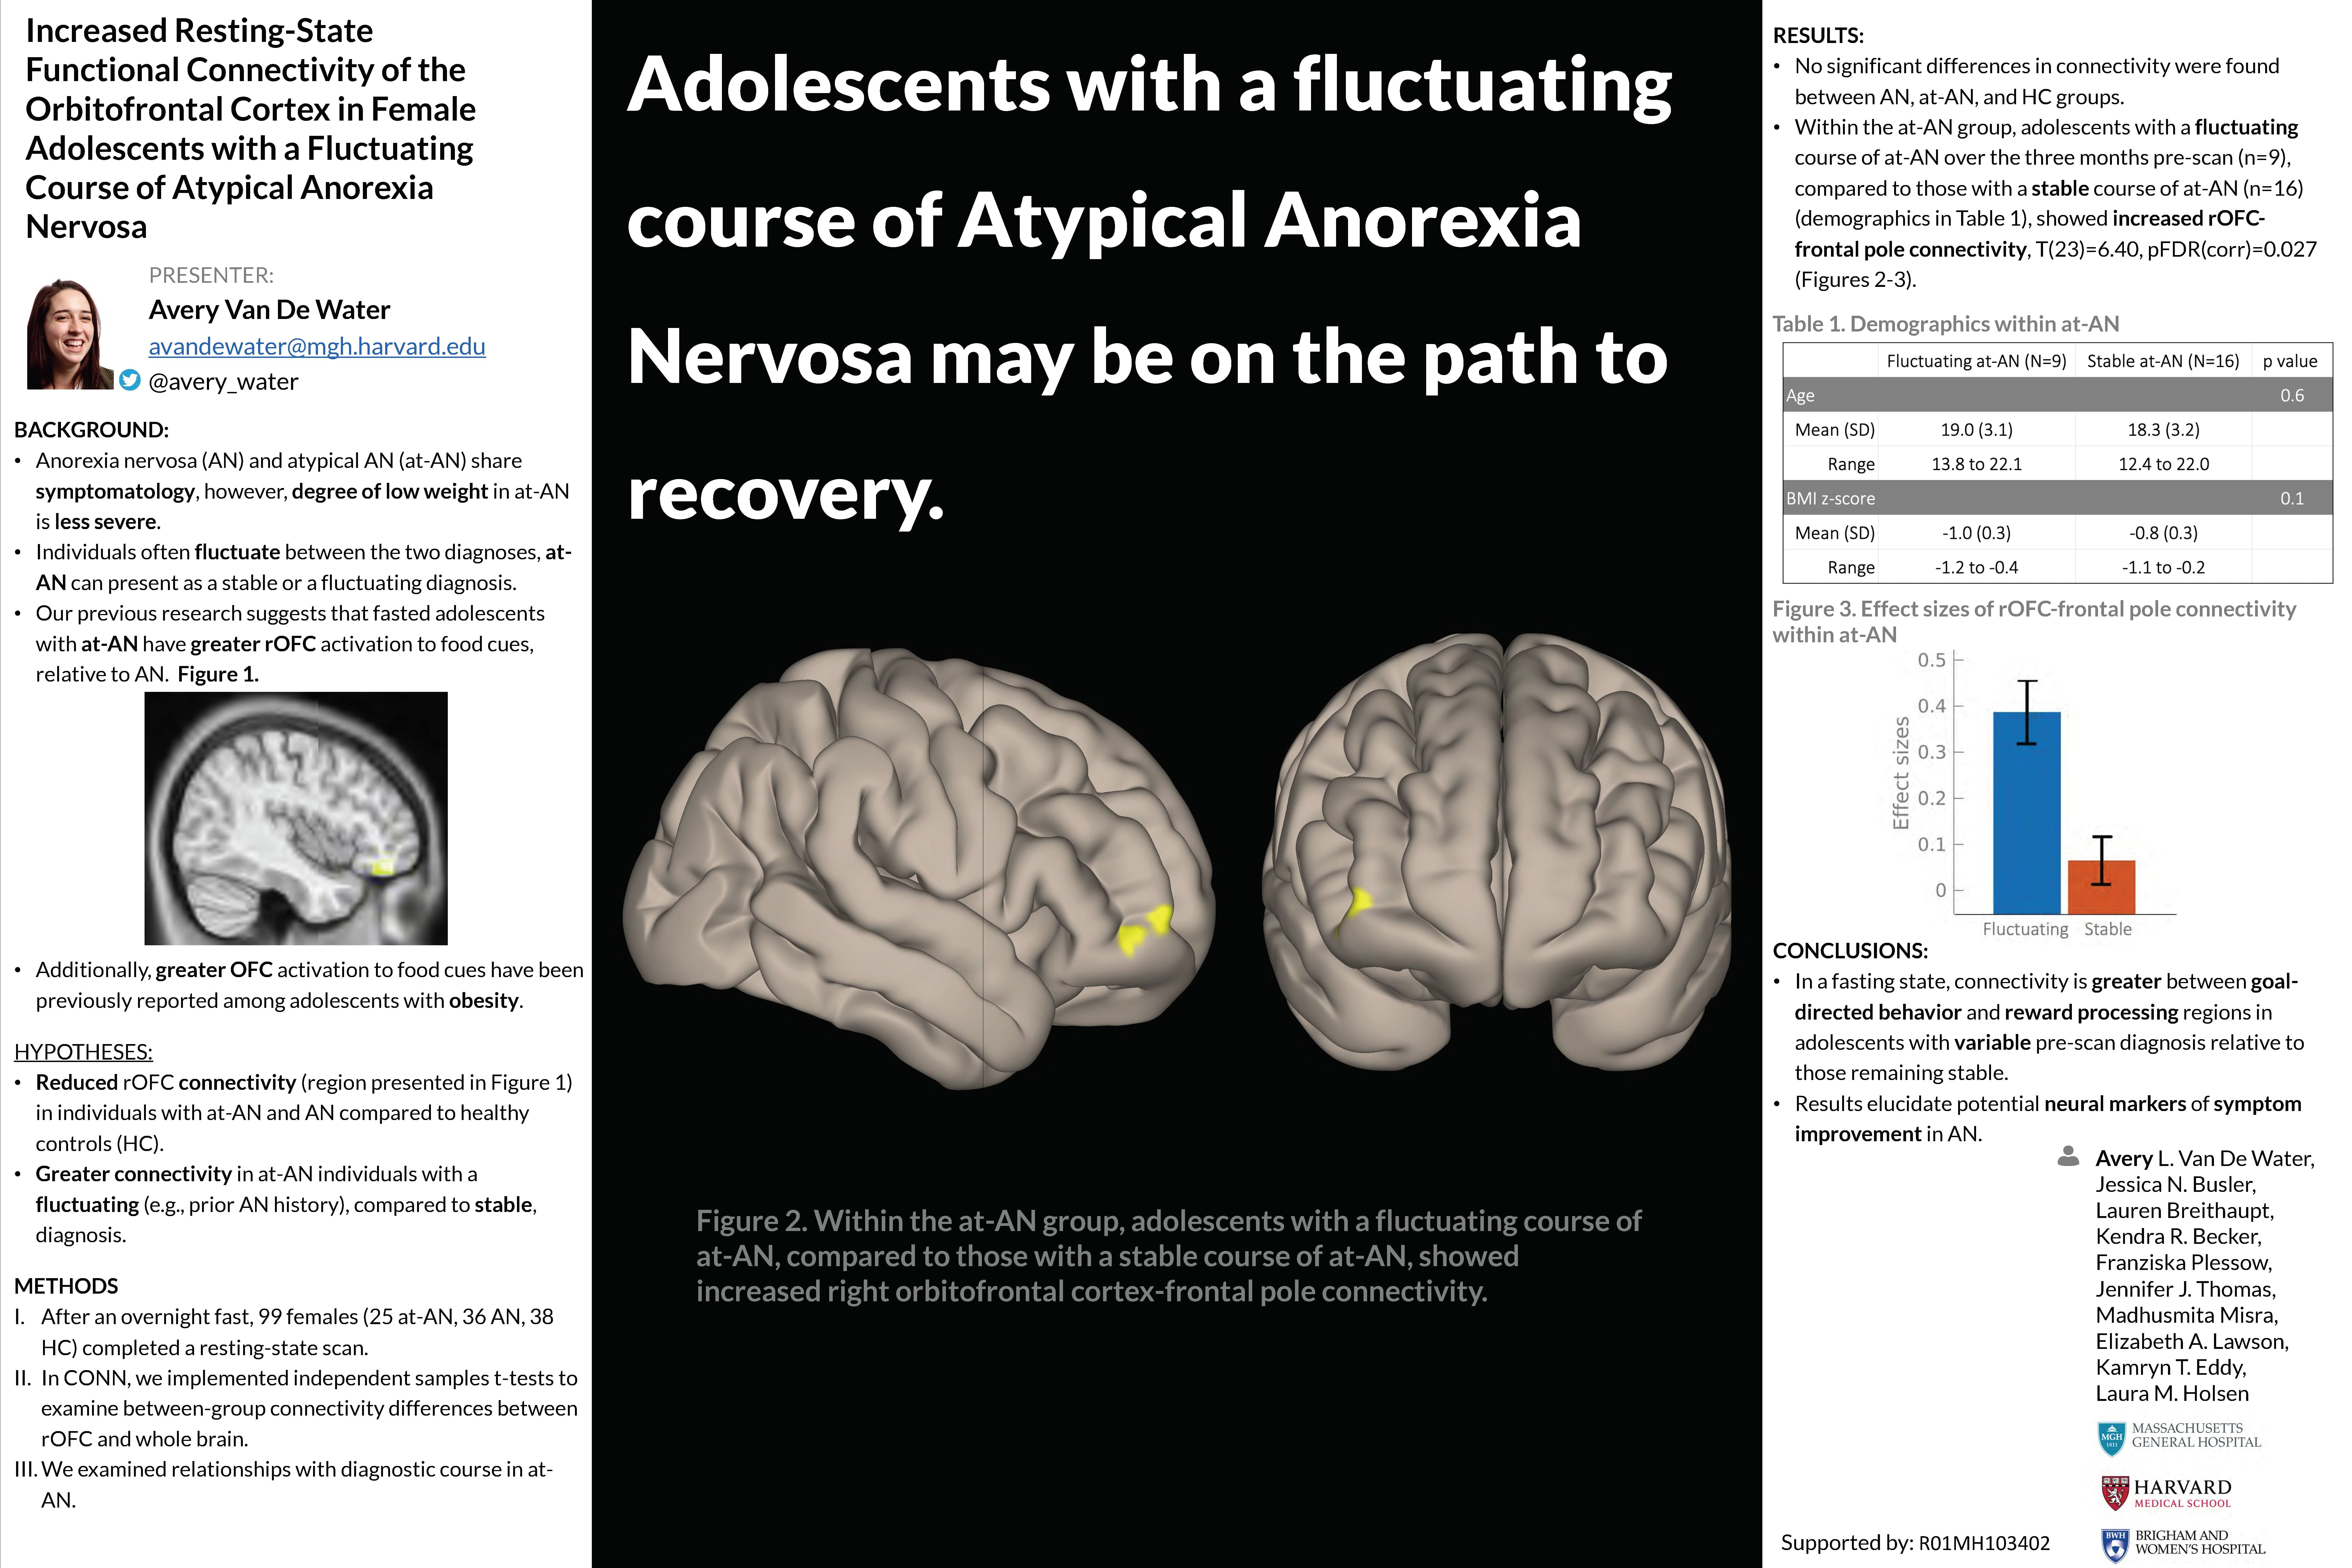 Increased Resting-State Functional Connectivity of the Orbitofrontal Cortex in Female Adolescents with a Fluctuating Course of Atypical Anorexia Nervosa